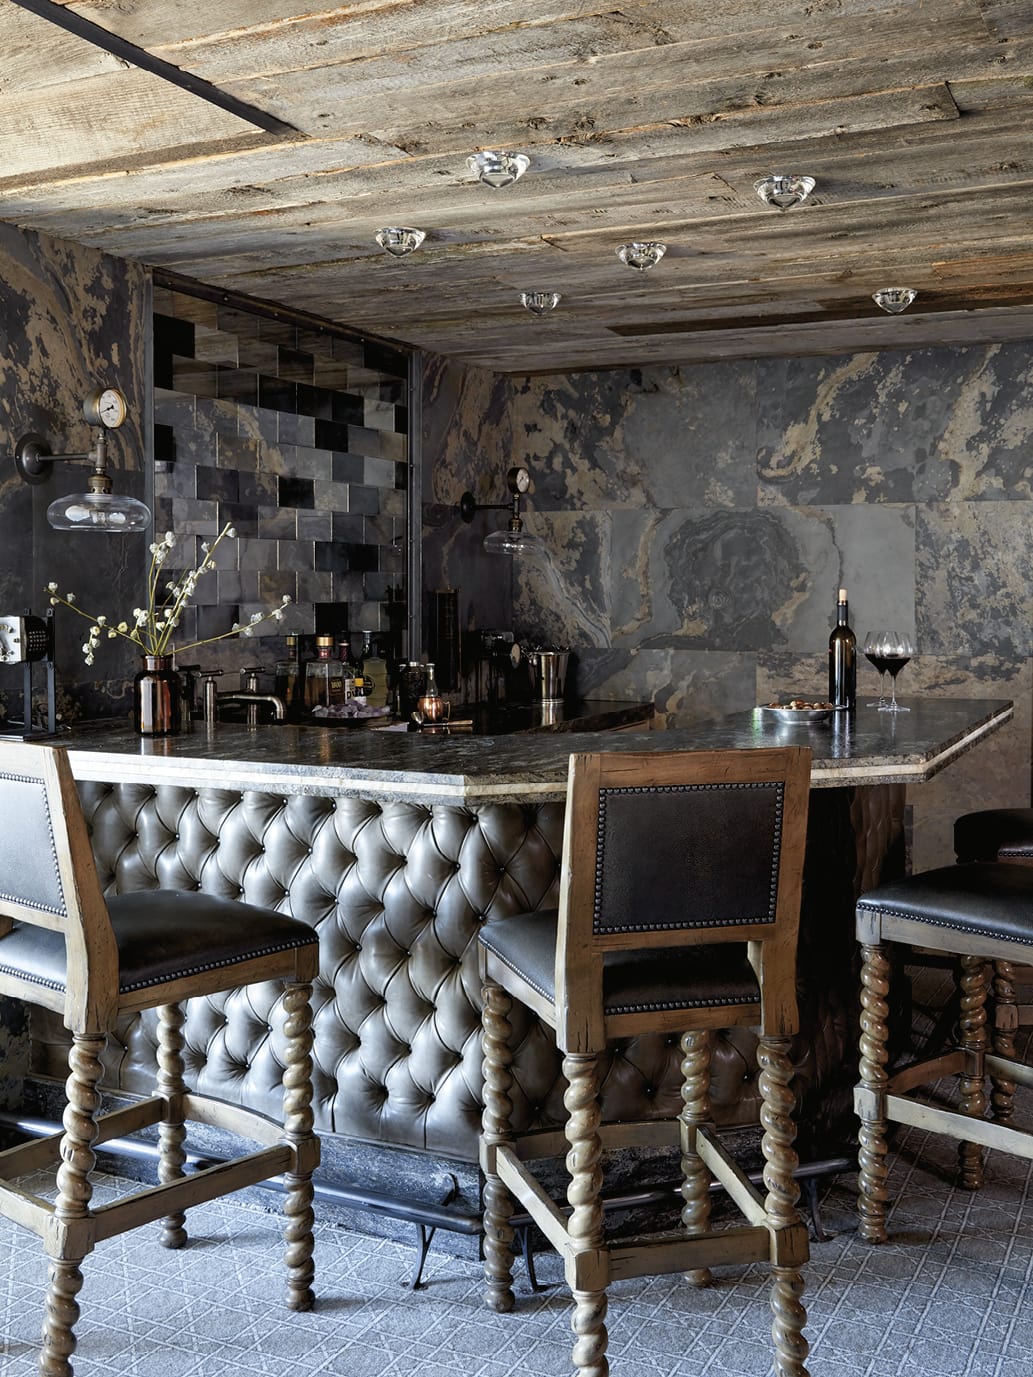 Bar area with wooden ceiling